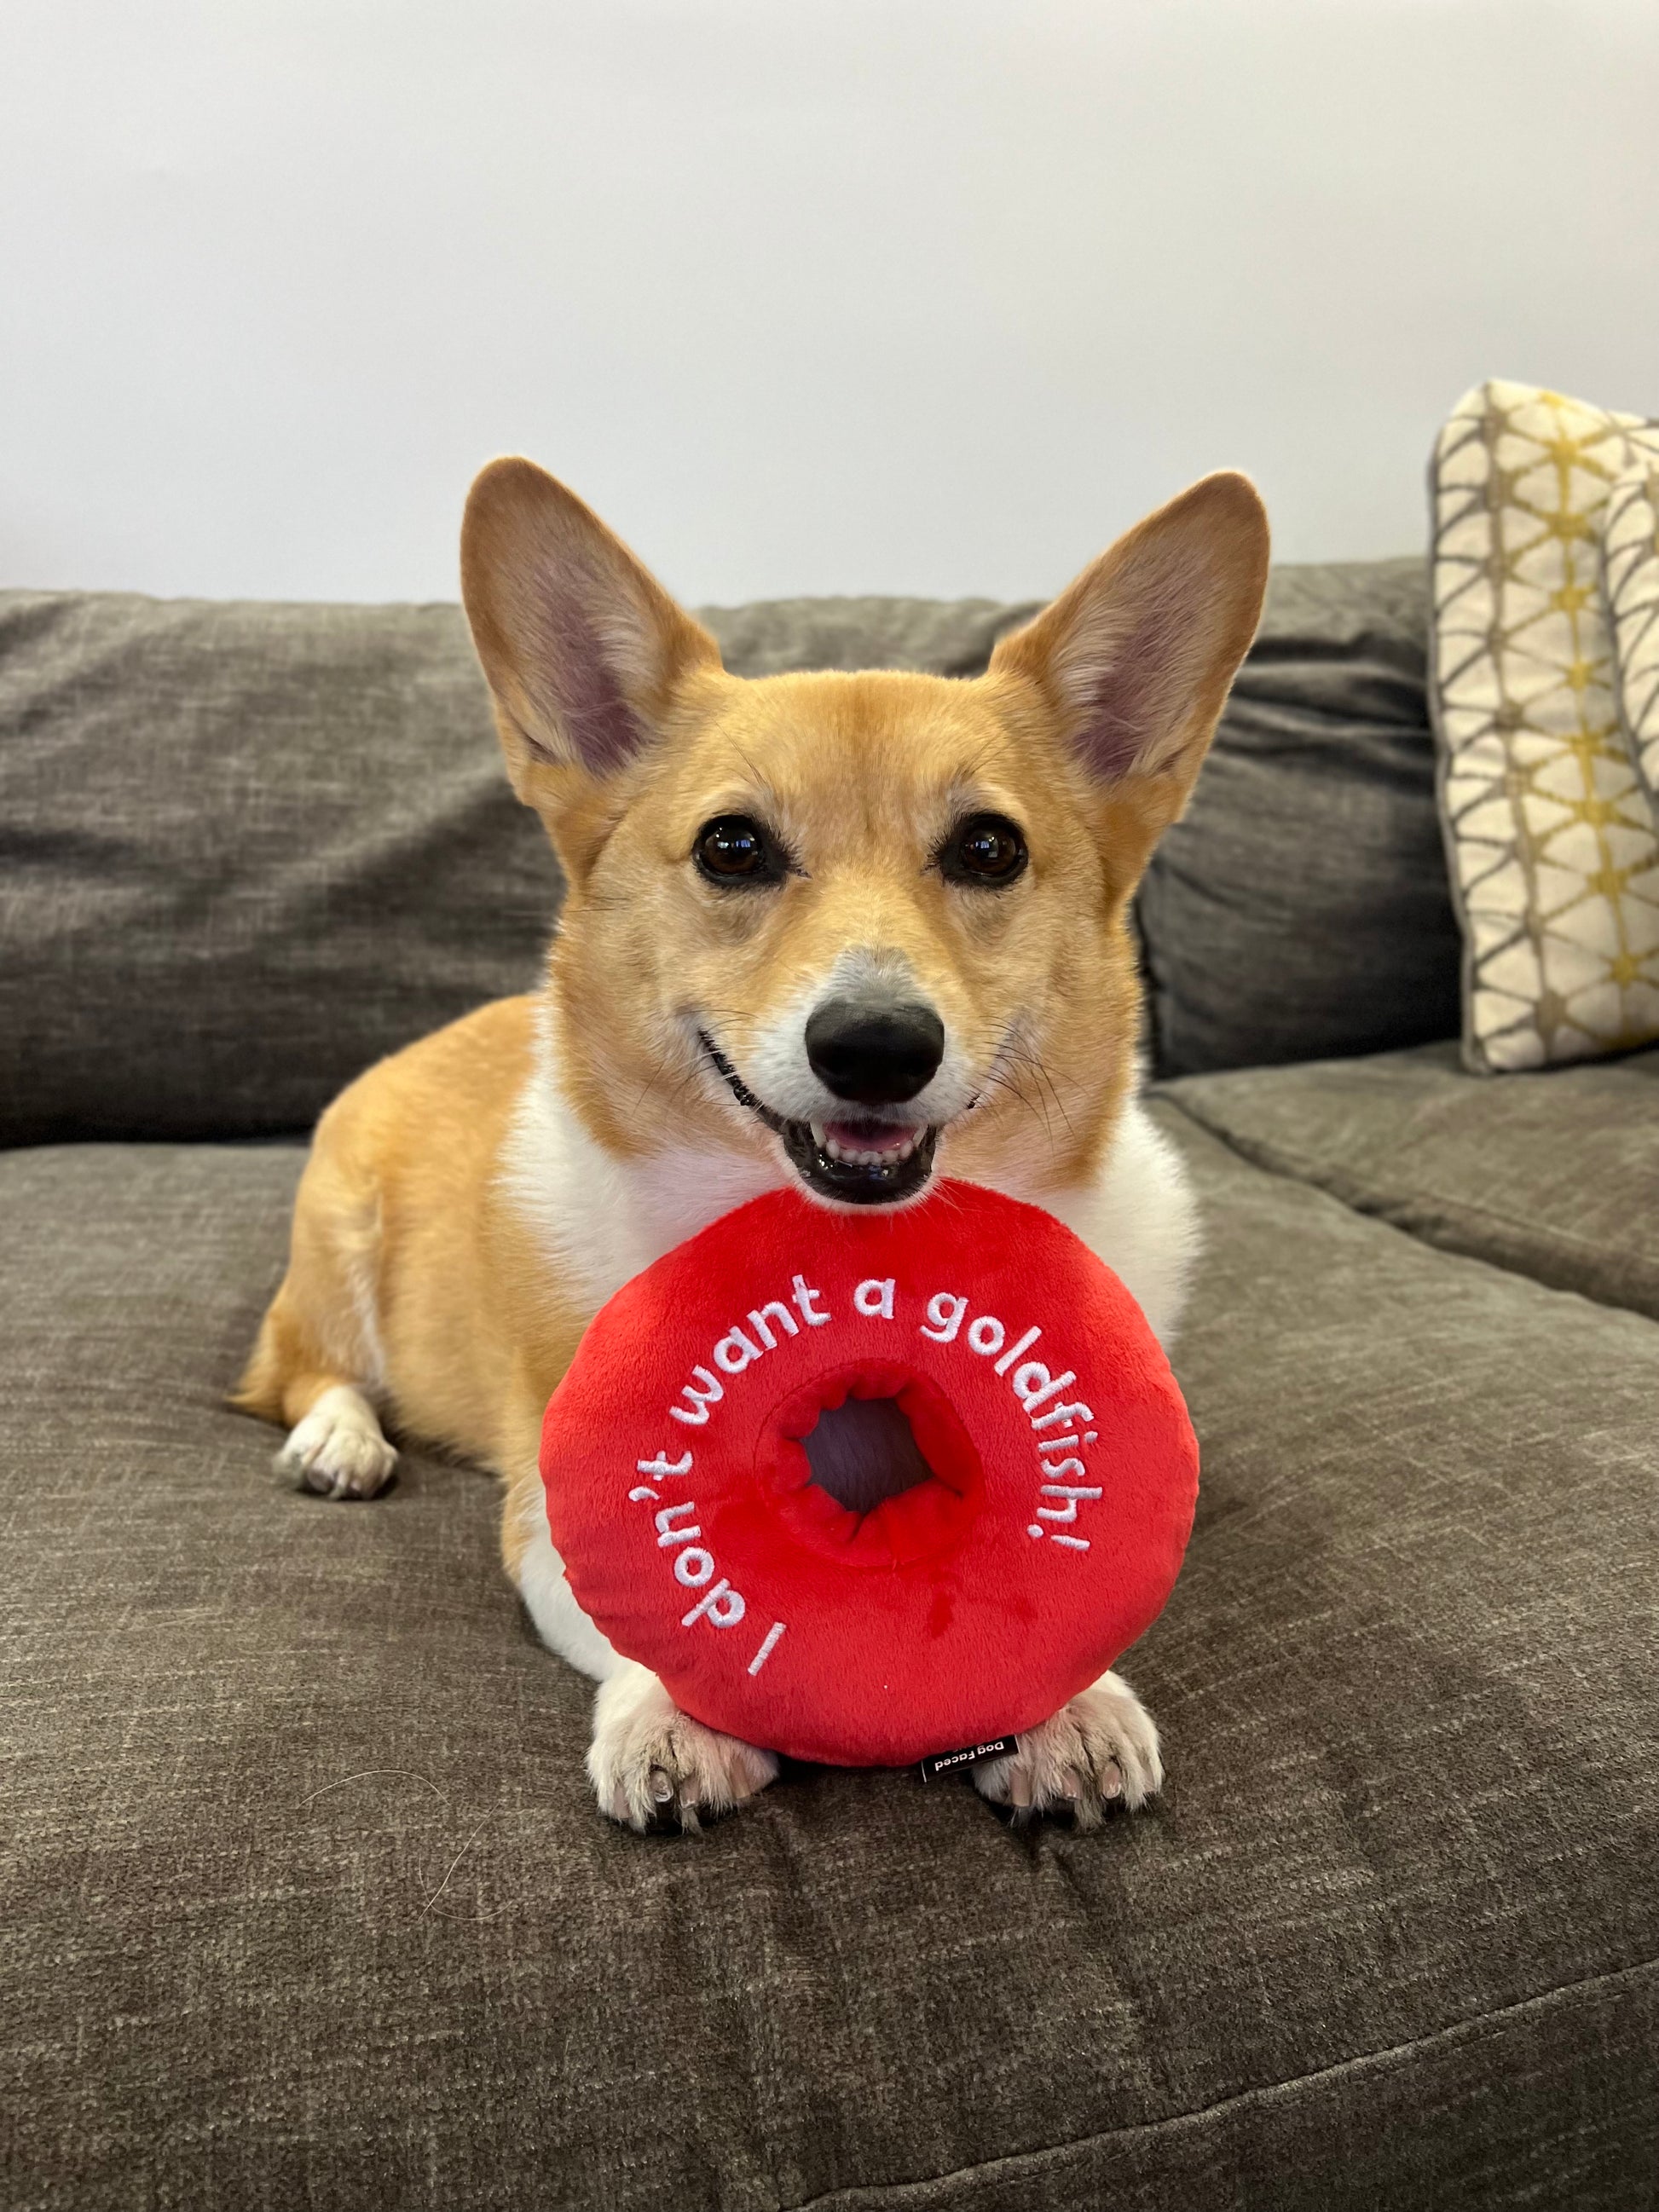 The Donut - Phish dog toy for Phan's best friend – Dog Faced Toys